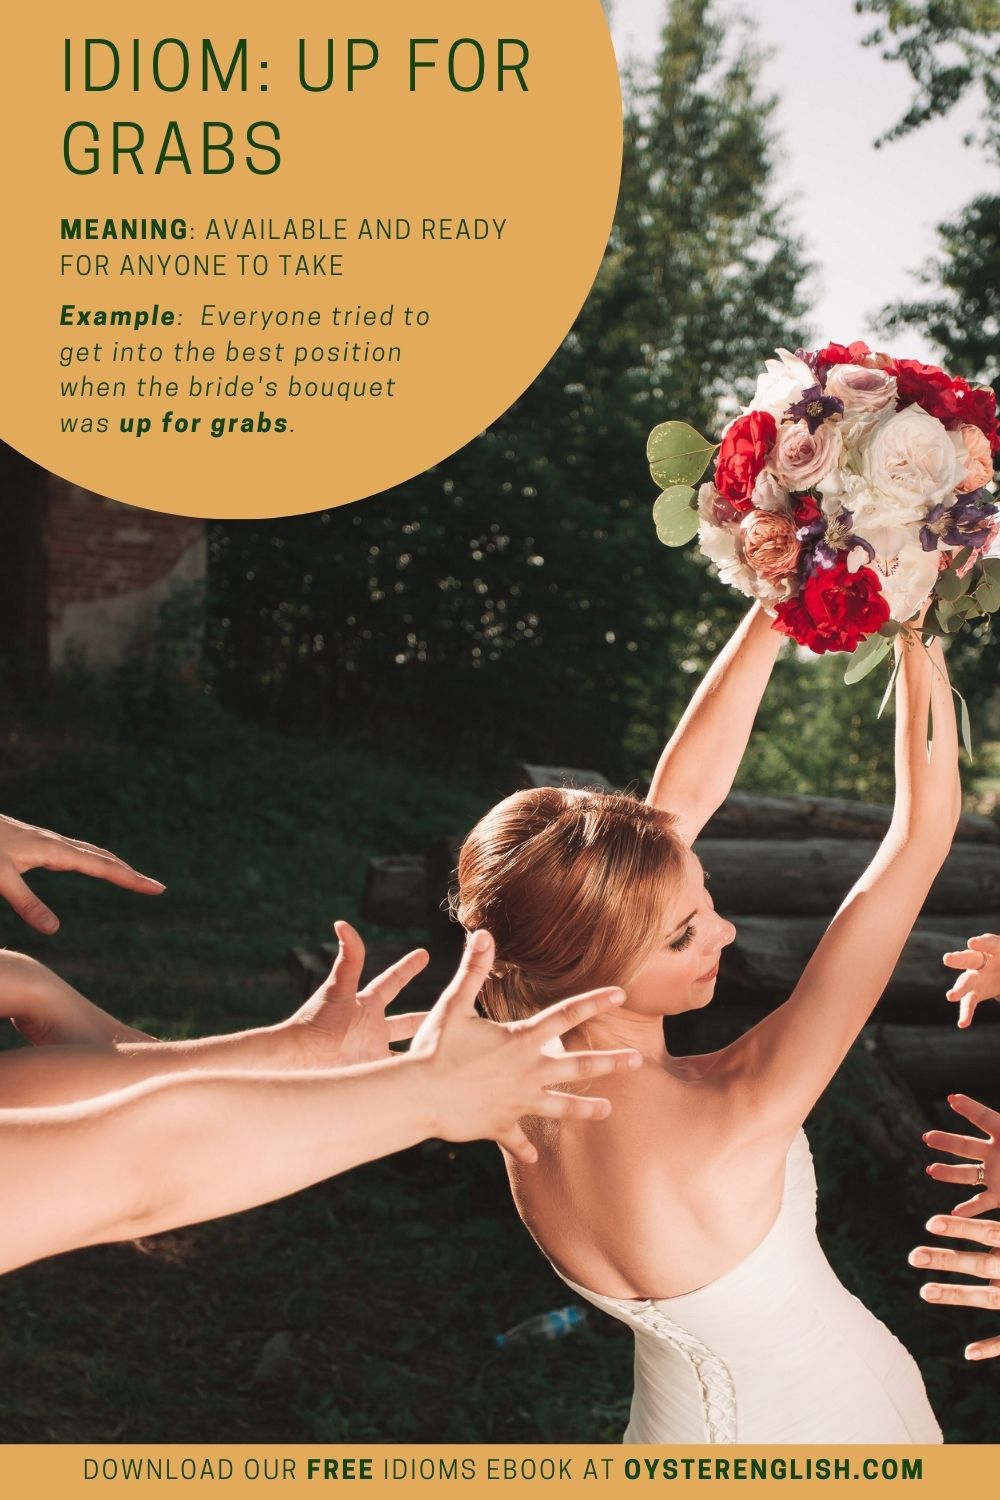 The bride holds her bouquet in the air and the wedding guests' hands are stretched out, ready to catch it. "Everyone tried to get in the best position when the bride's bouquet was up for grabs."